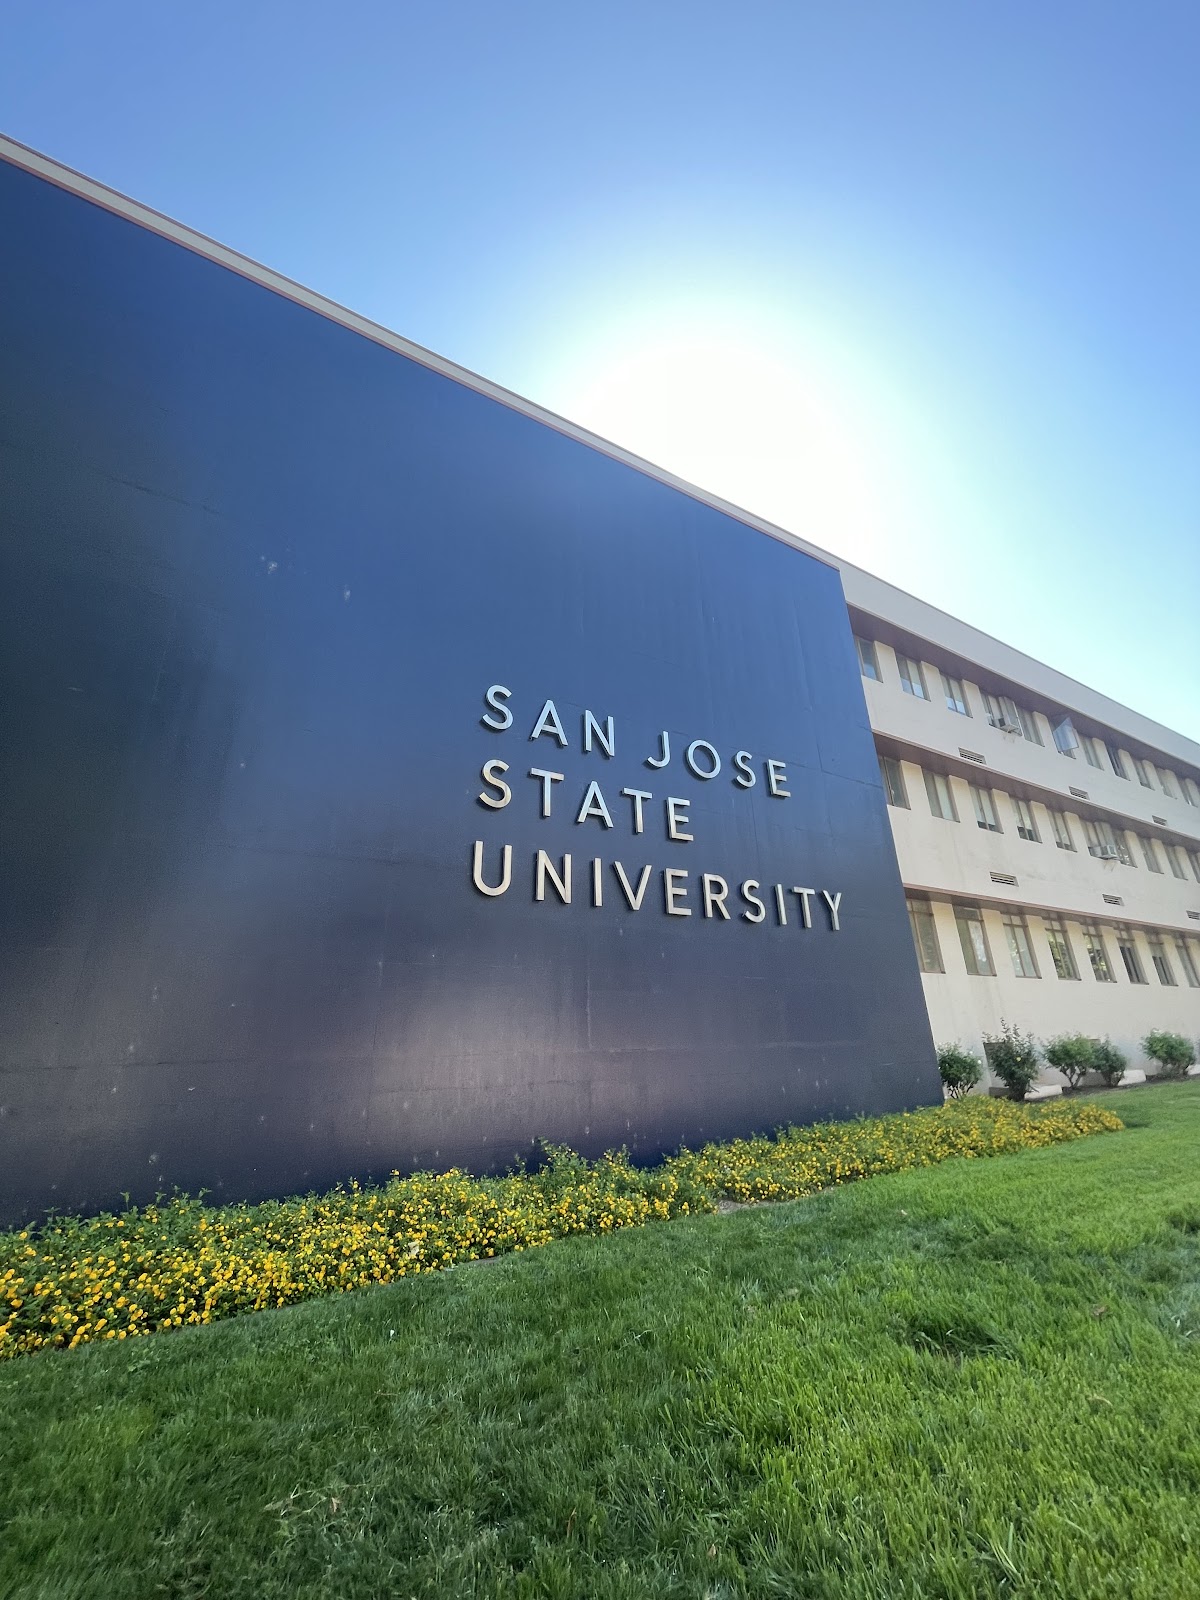 San Jose State University plaque as found at the school